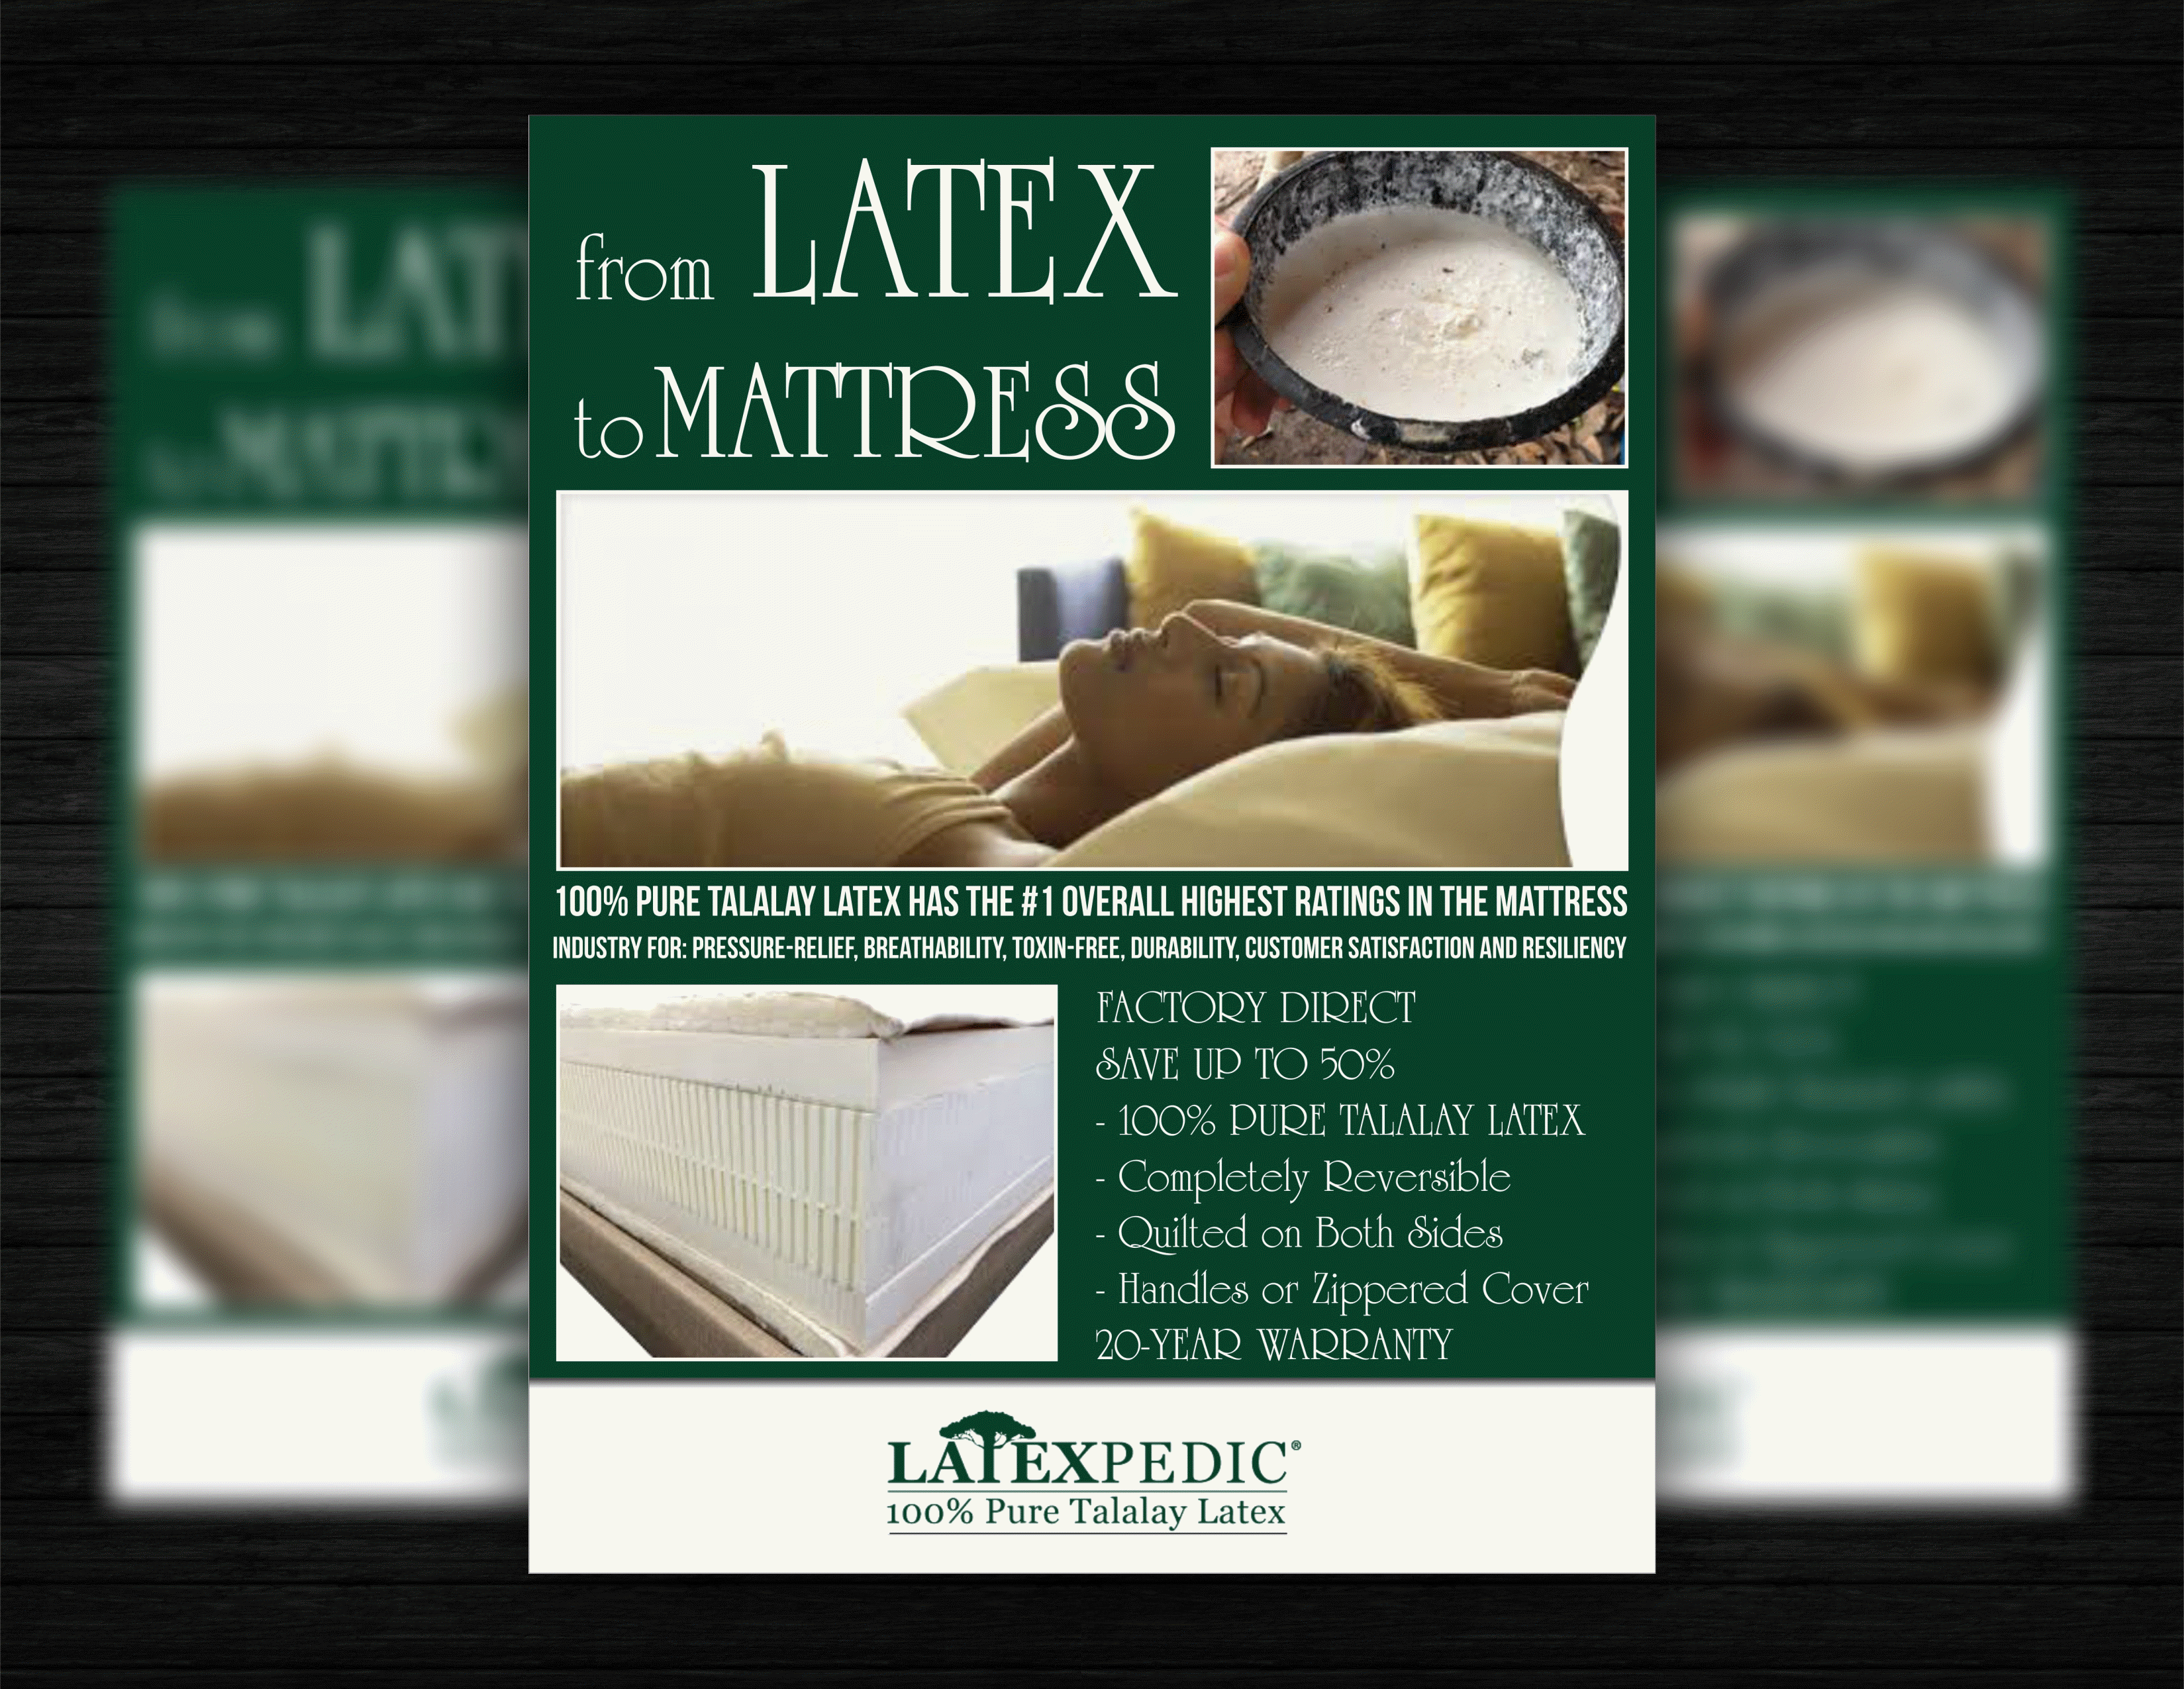 from latex to mattress